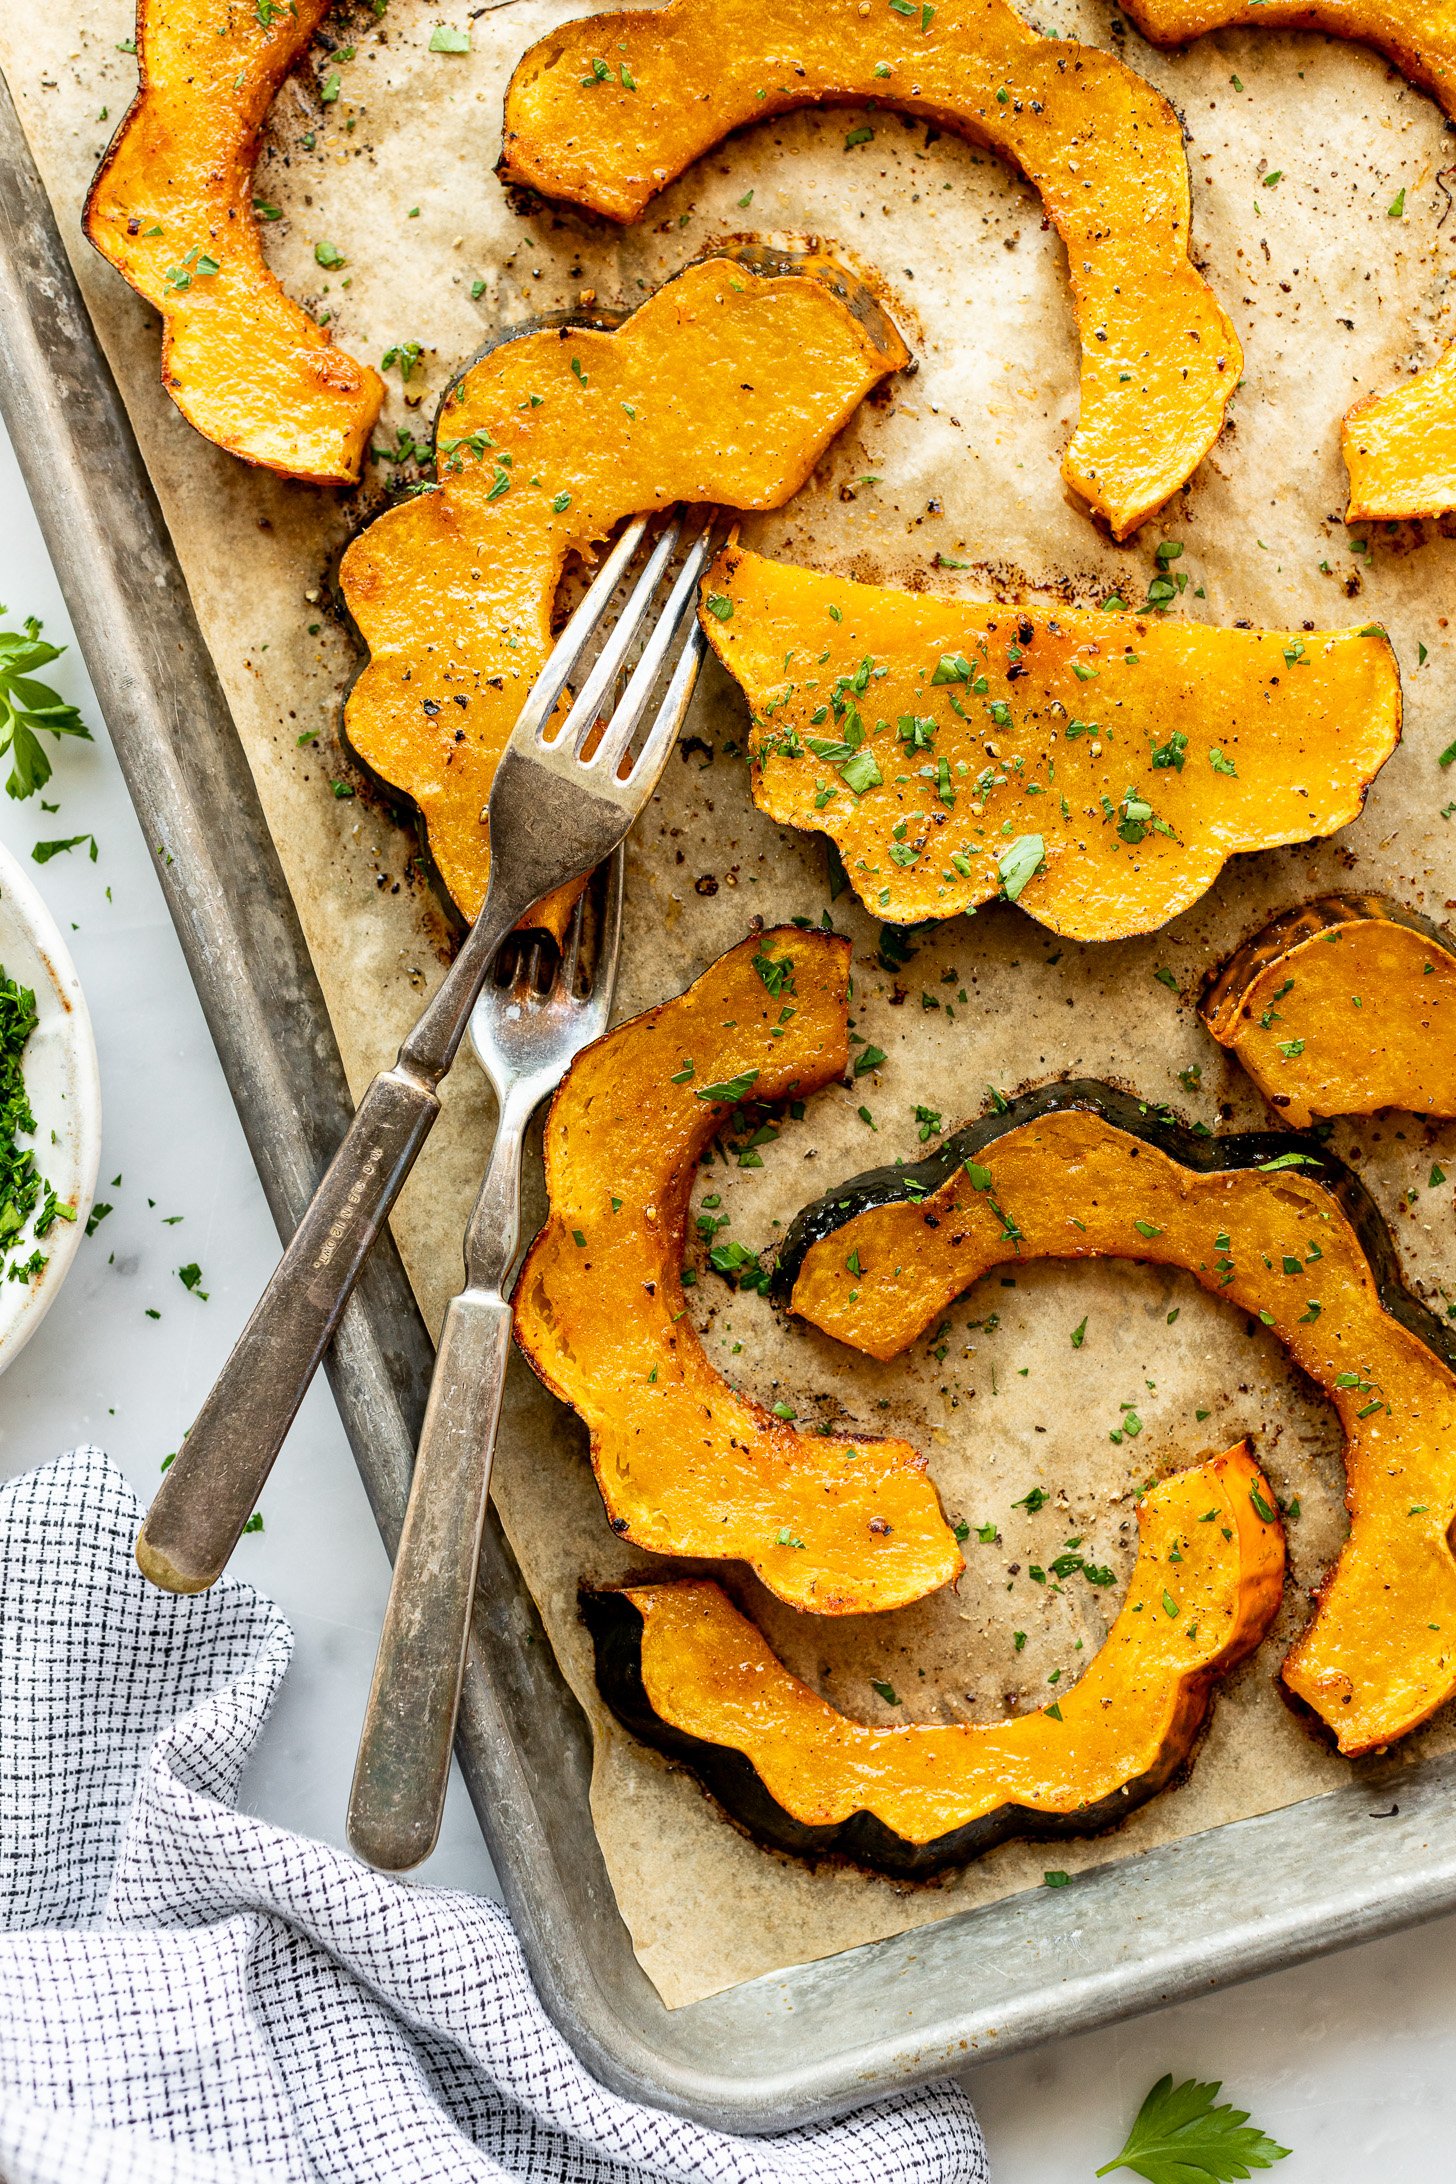 Parchment lined baking sheet with slices of honey roasted acorn squash and two forks. The acorn squash slices are topped with flecks of fresh parsley. The baking sheet is surrounded by a white and blue napkin, a small bowl with chopped parlsey, and some parsley sprinkled on the countertop.